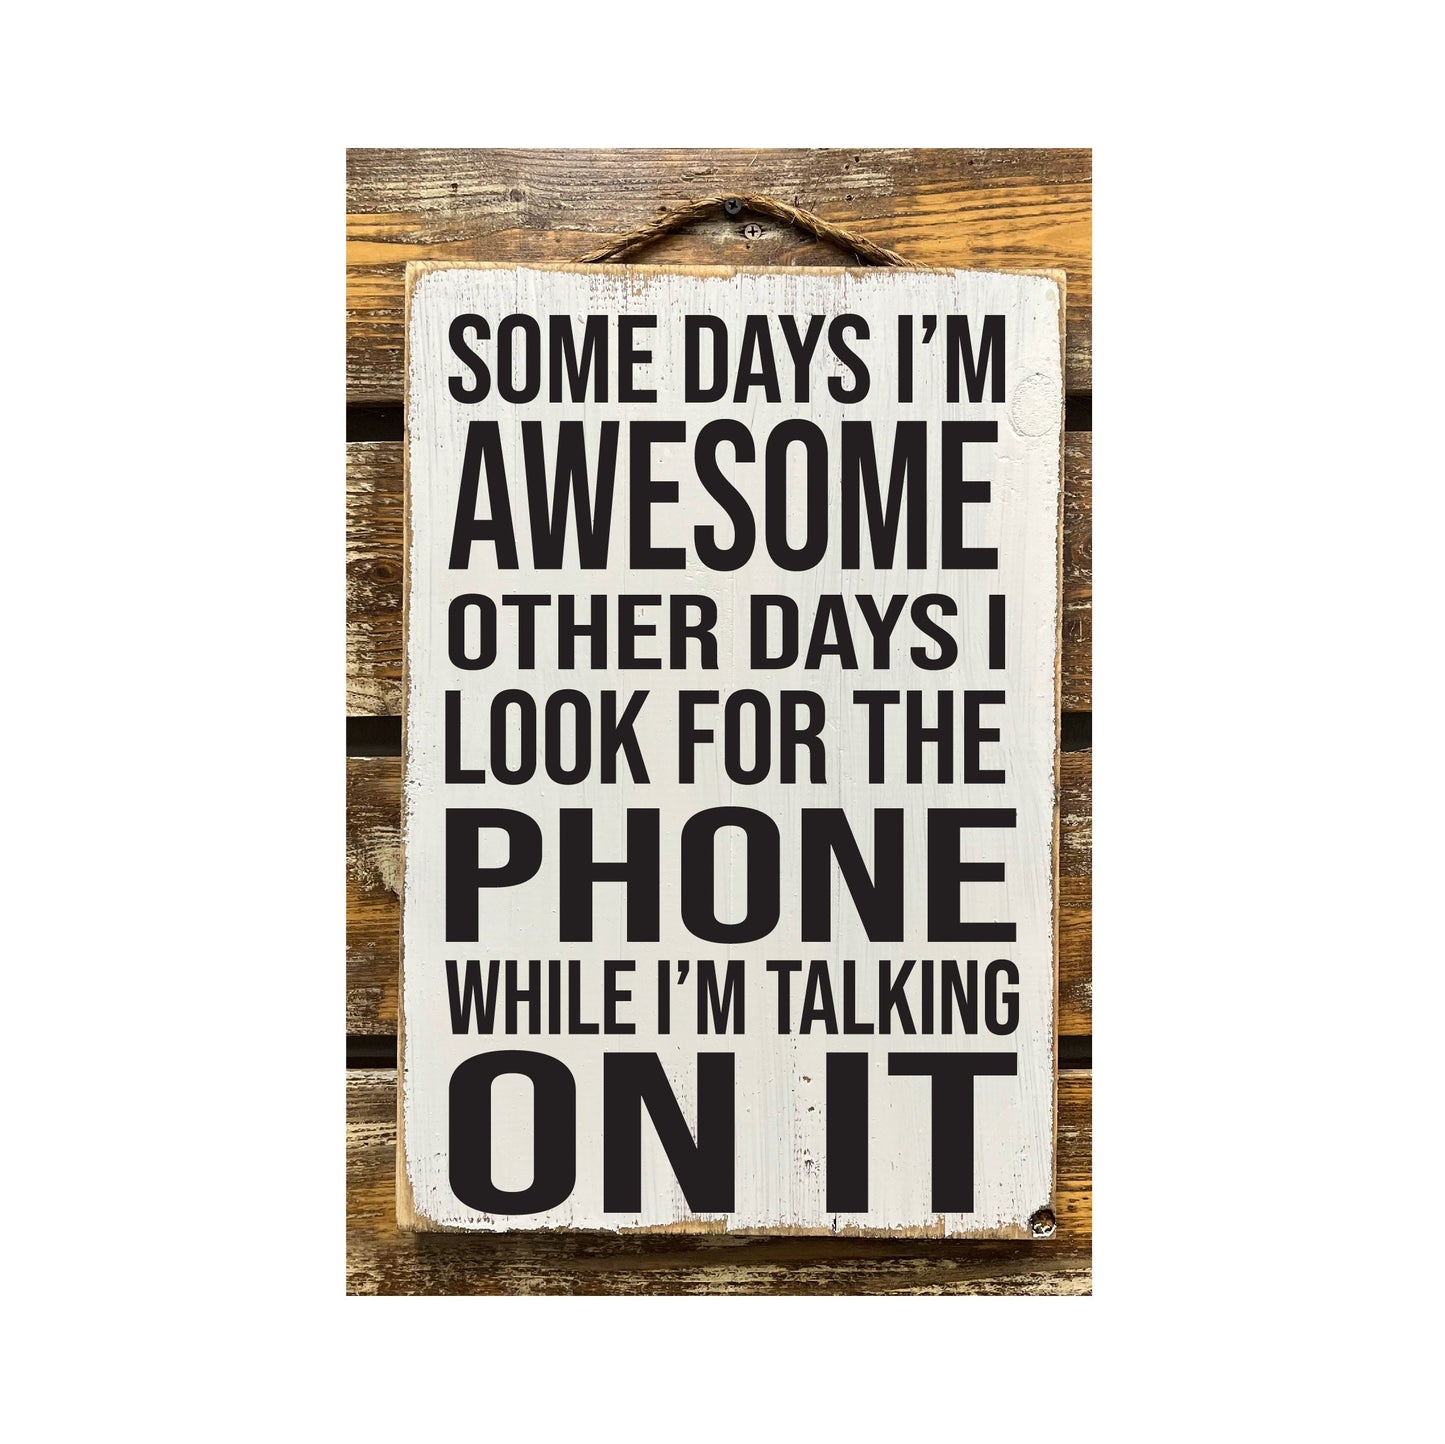 Some Days I'm Awesome Other Days I Look For The Phone...